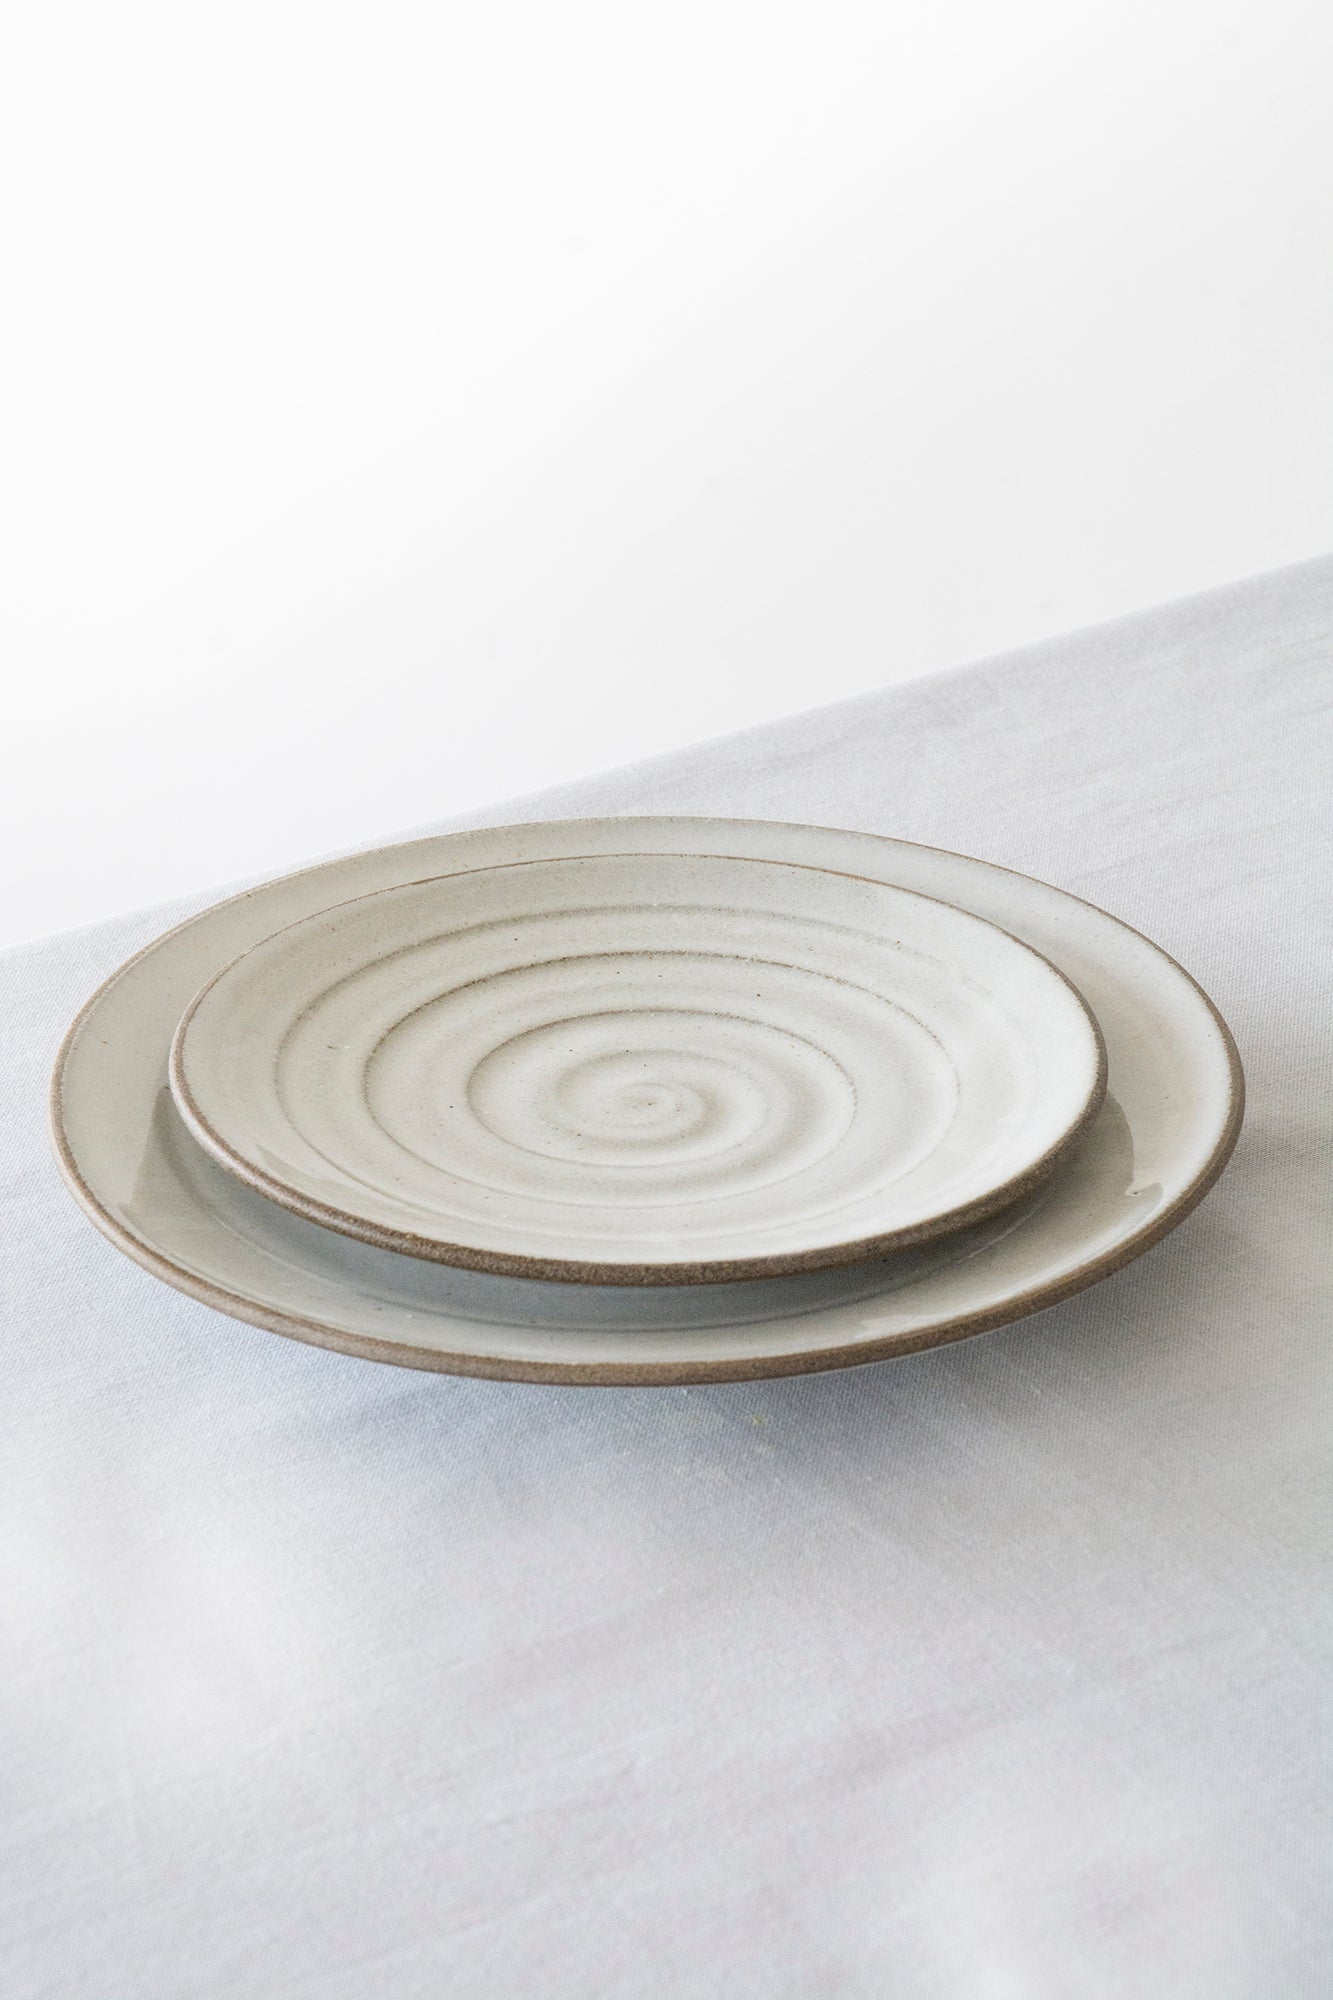 Pottery Dinnerware, Main Course and Salad Plate, 2 Plates - Mad About Pottery- plates